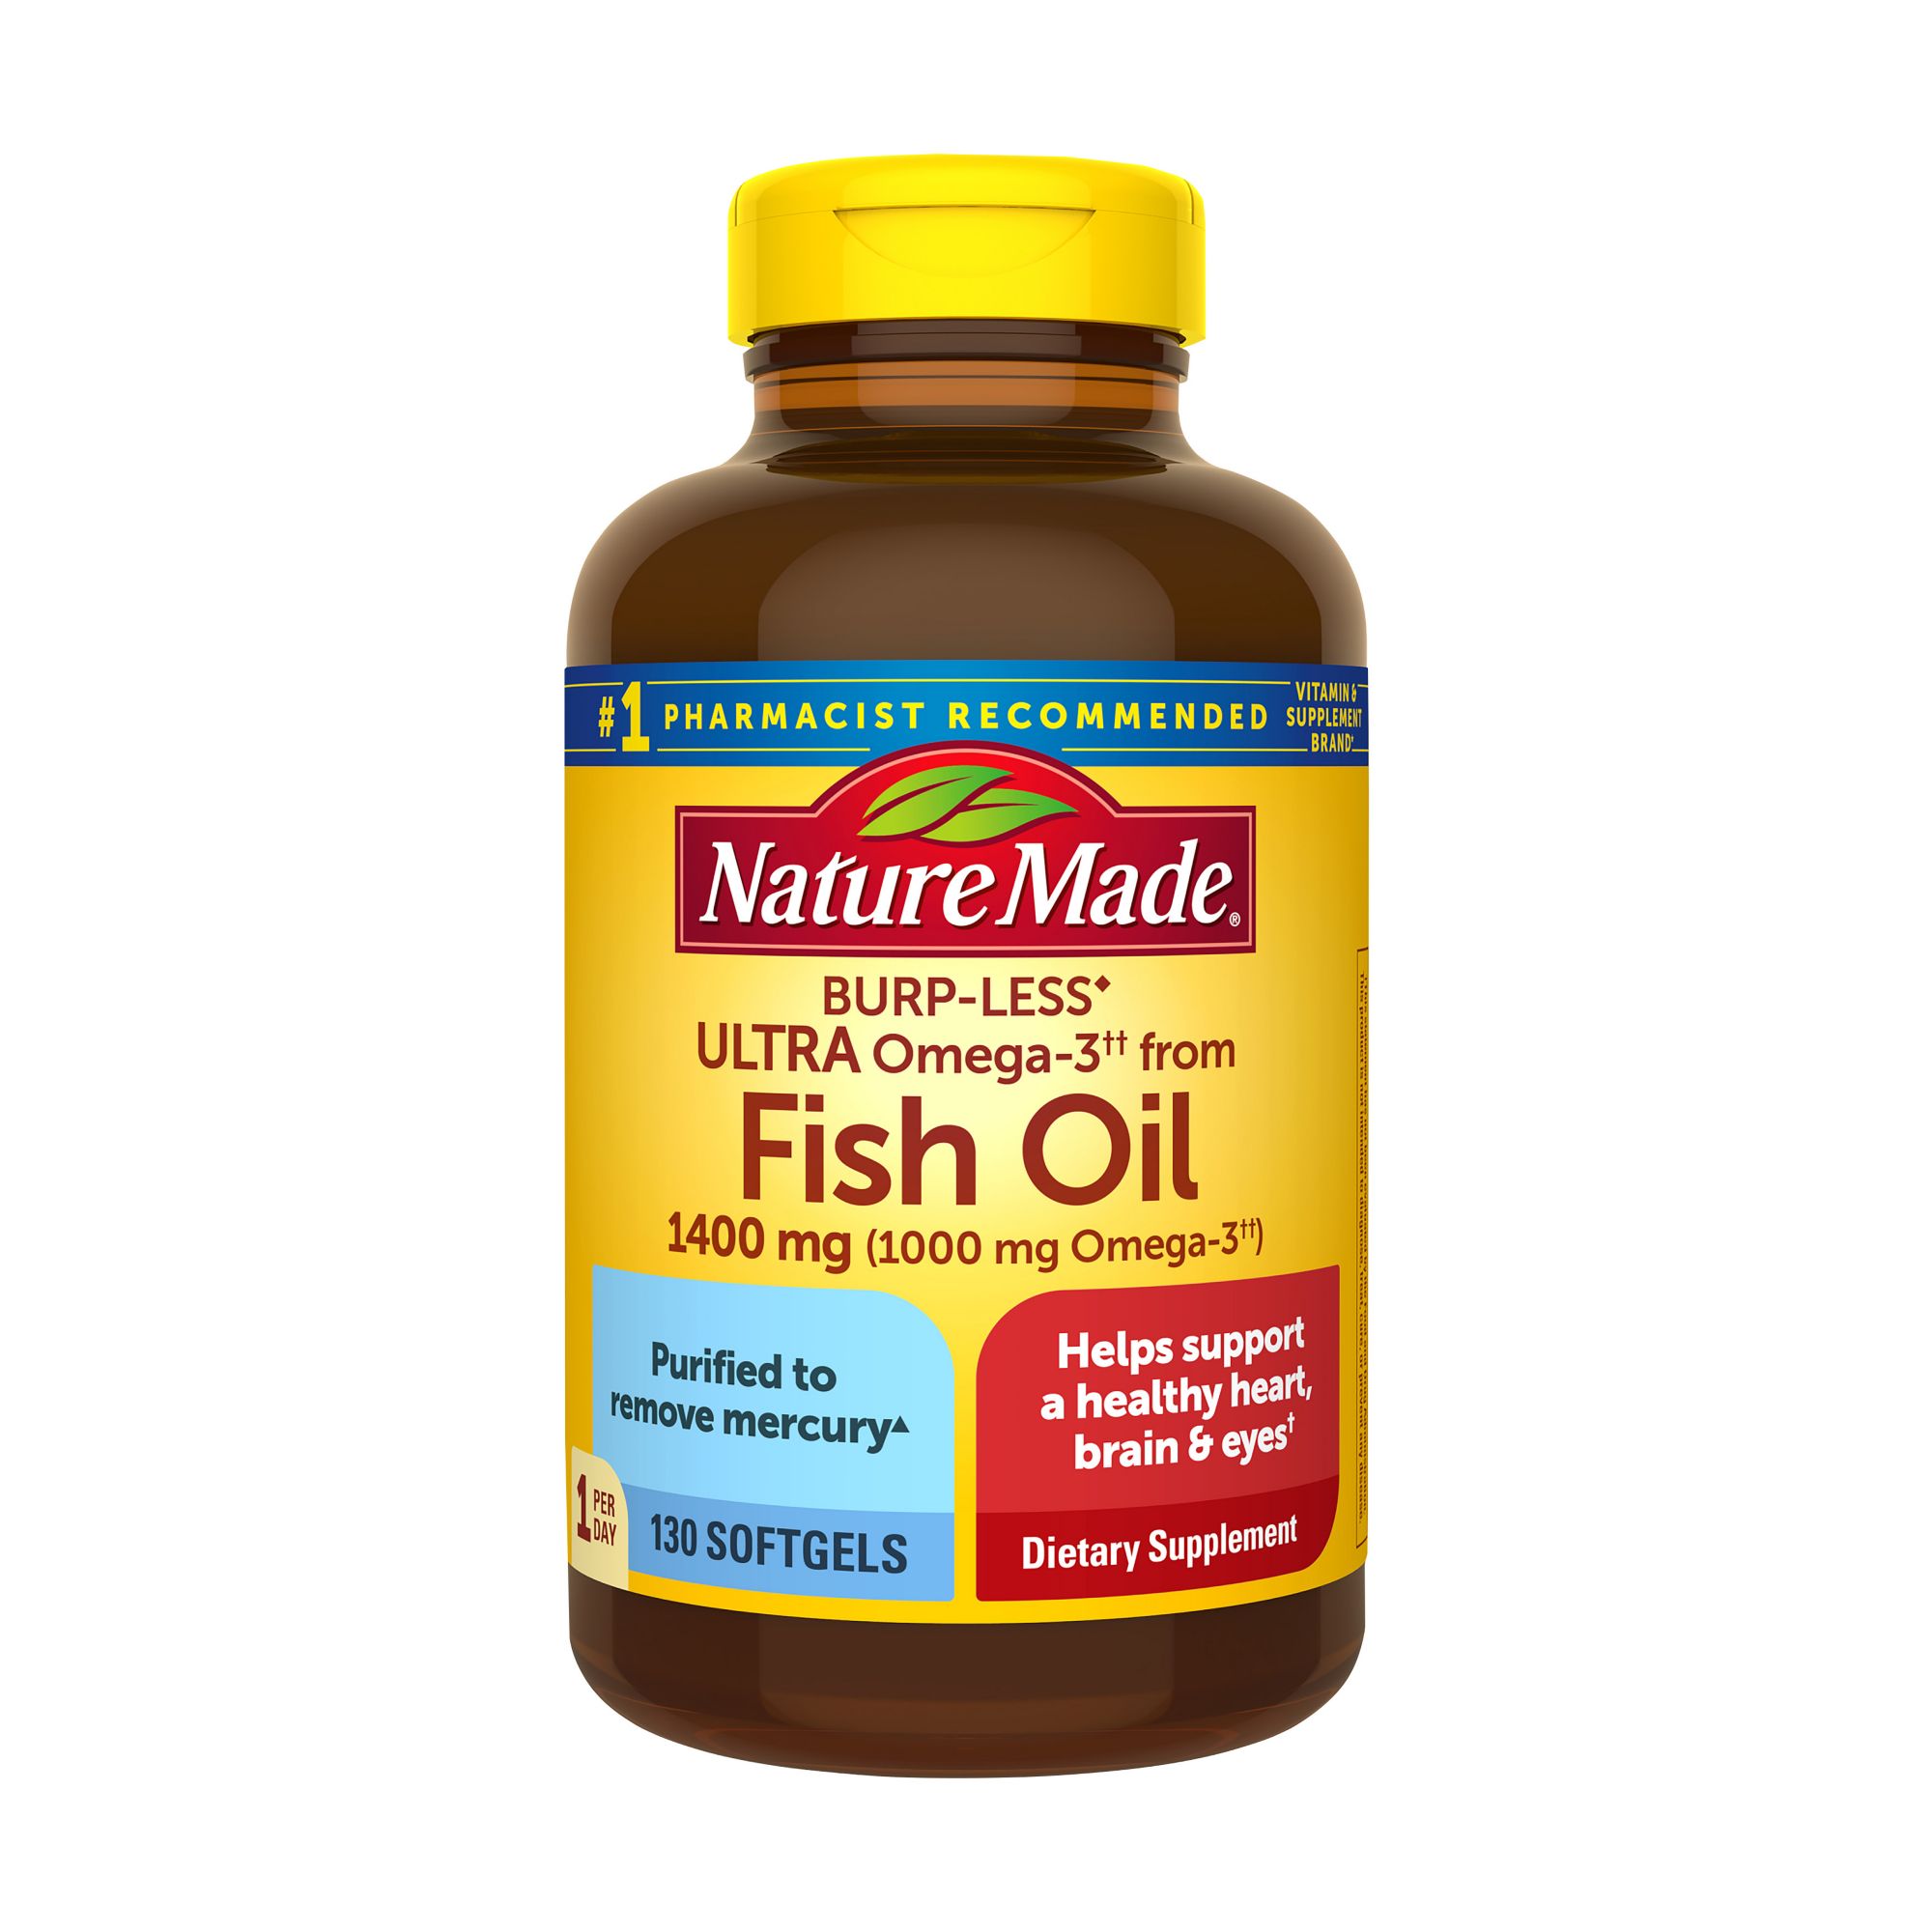 Sports Research Triple Strength Omega-3 Fish Oil, 150 Fish